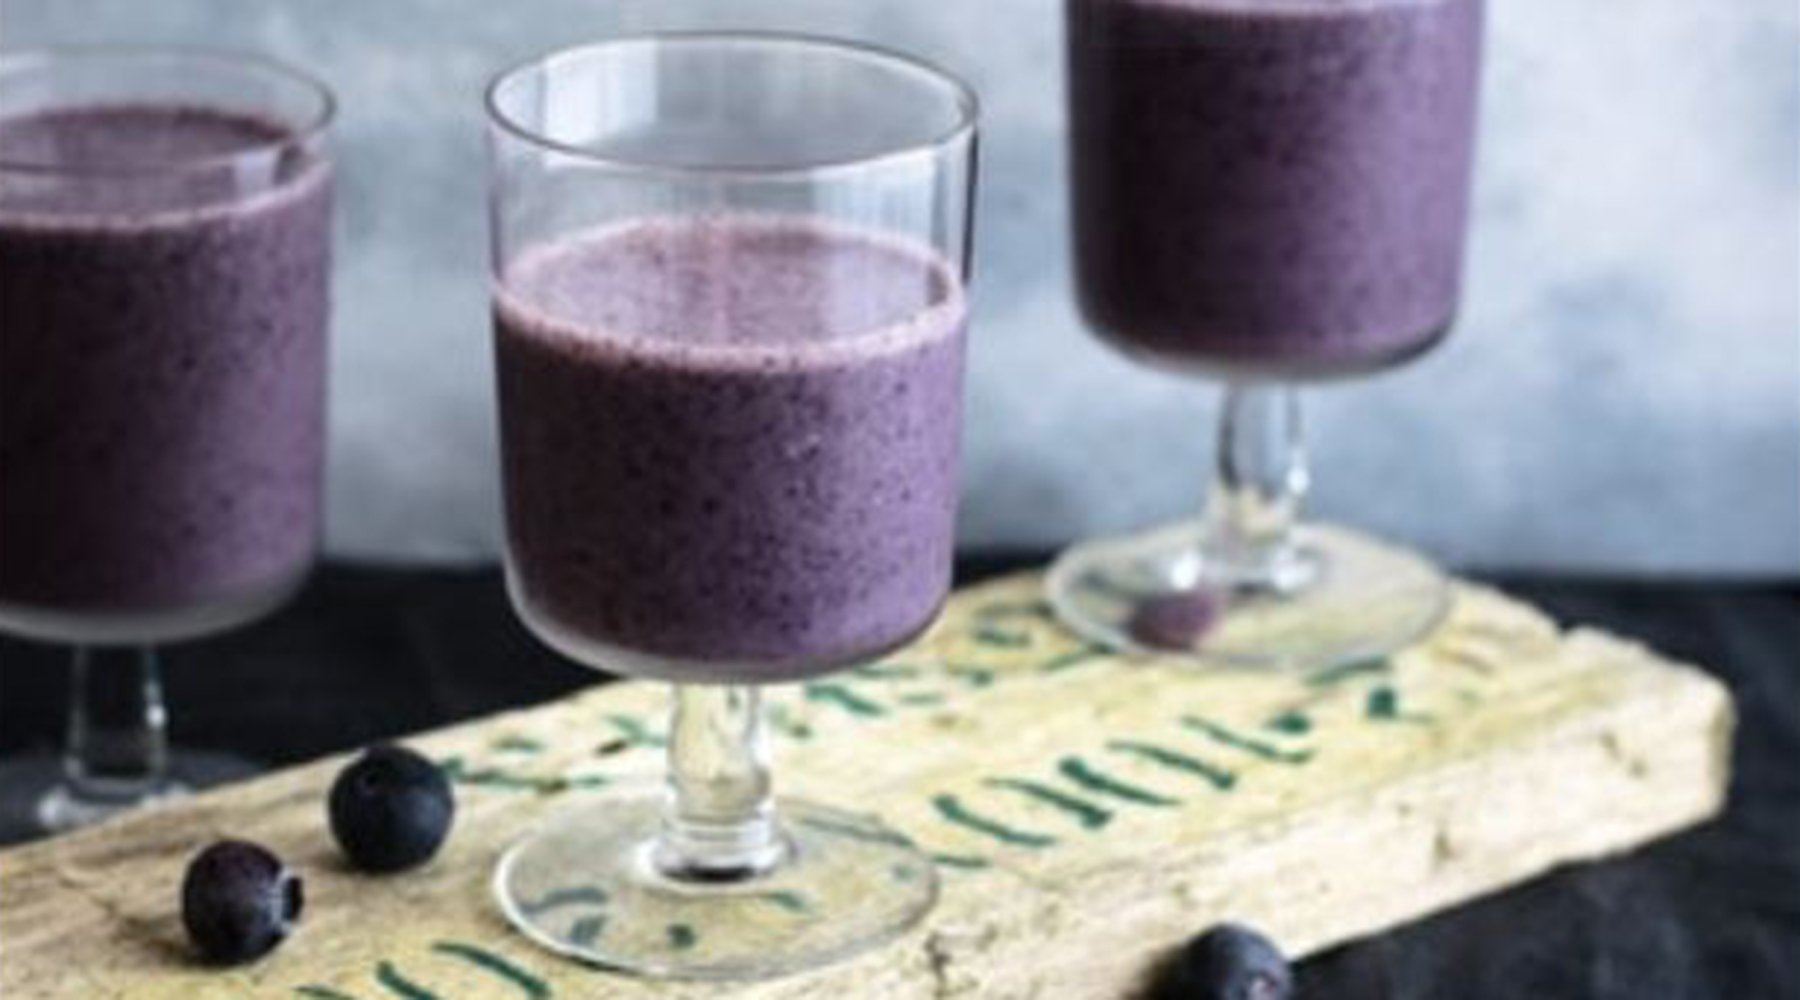 michelle yandle everyday healthy breakfast smoothie recipe